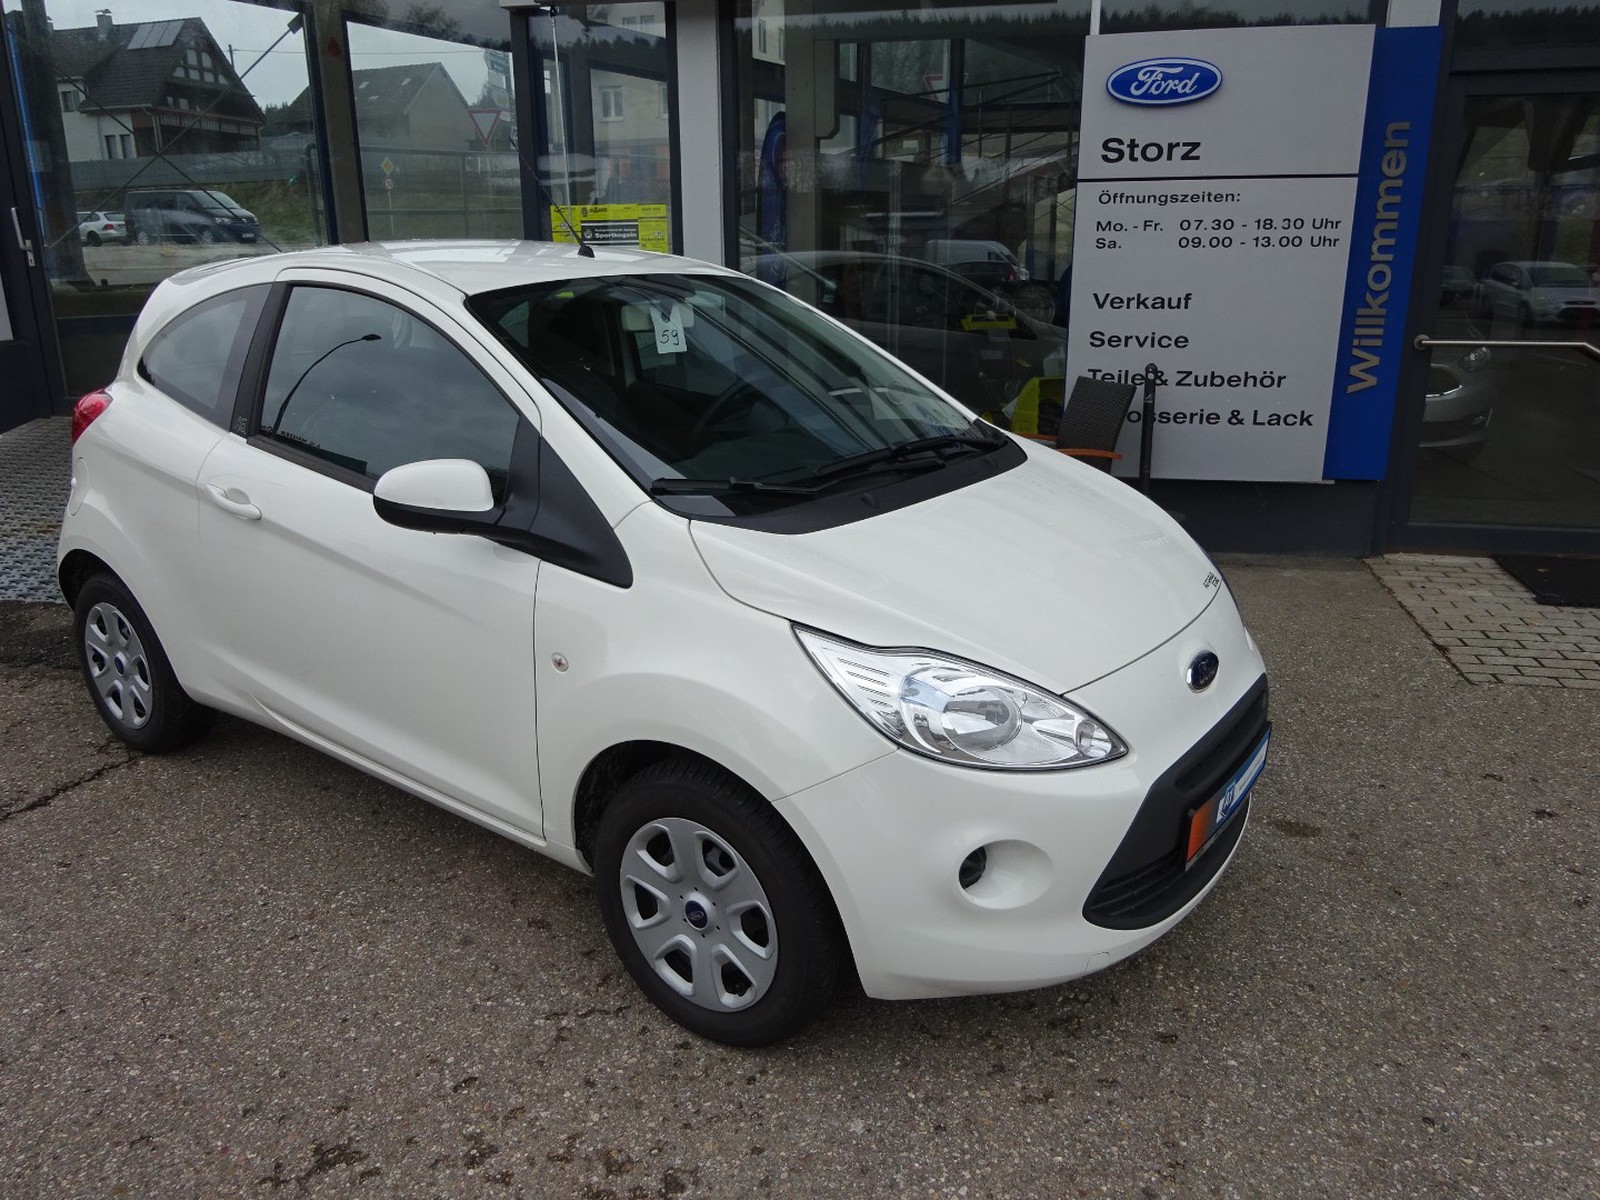 Ford Ka Trend Aux Abs Euro6 Used Buy In St Georgen Price 6490 Eur Int Nr 59st Sold